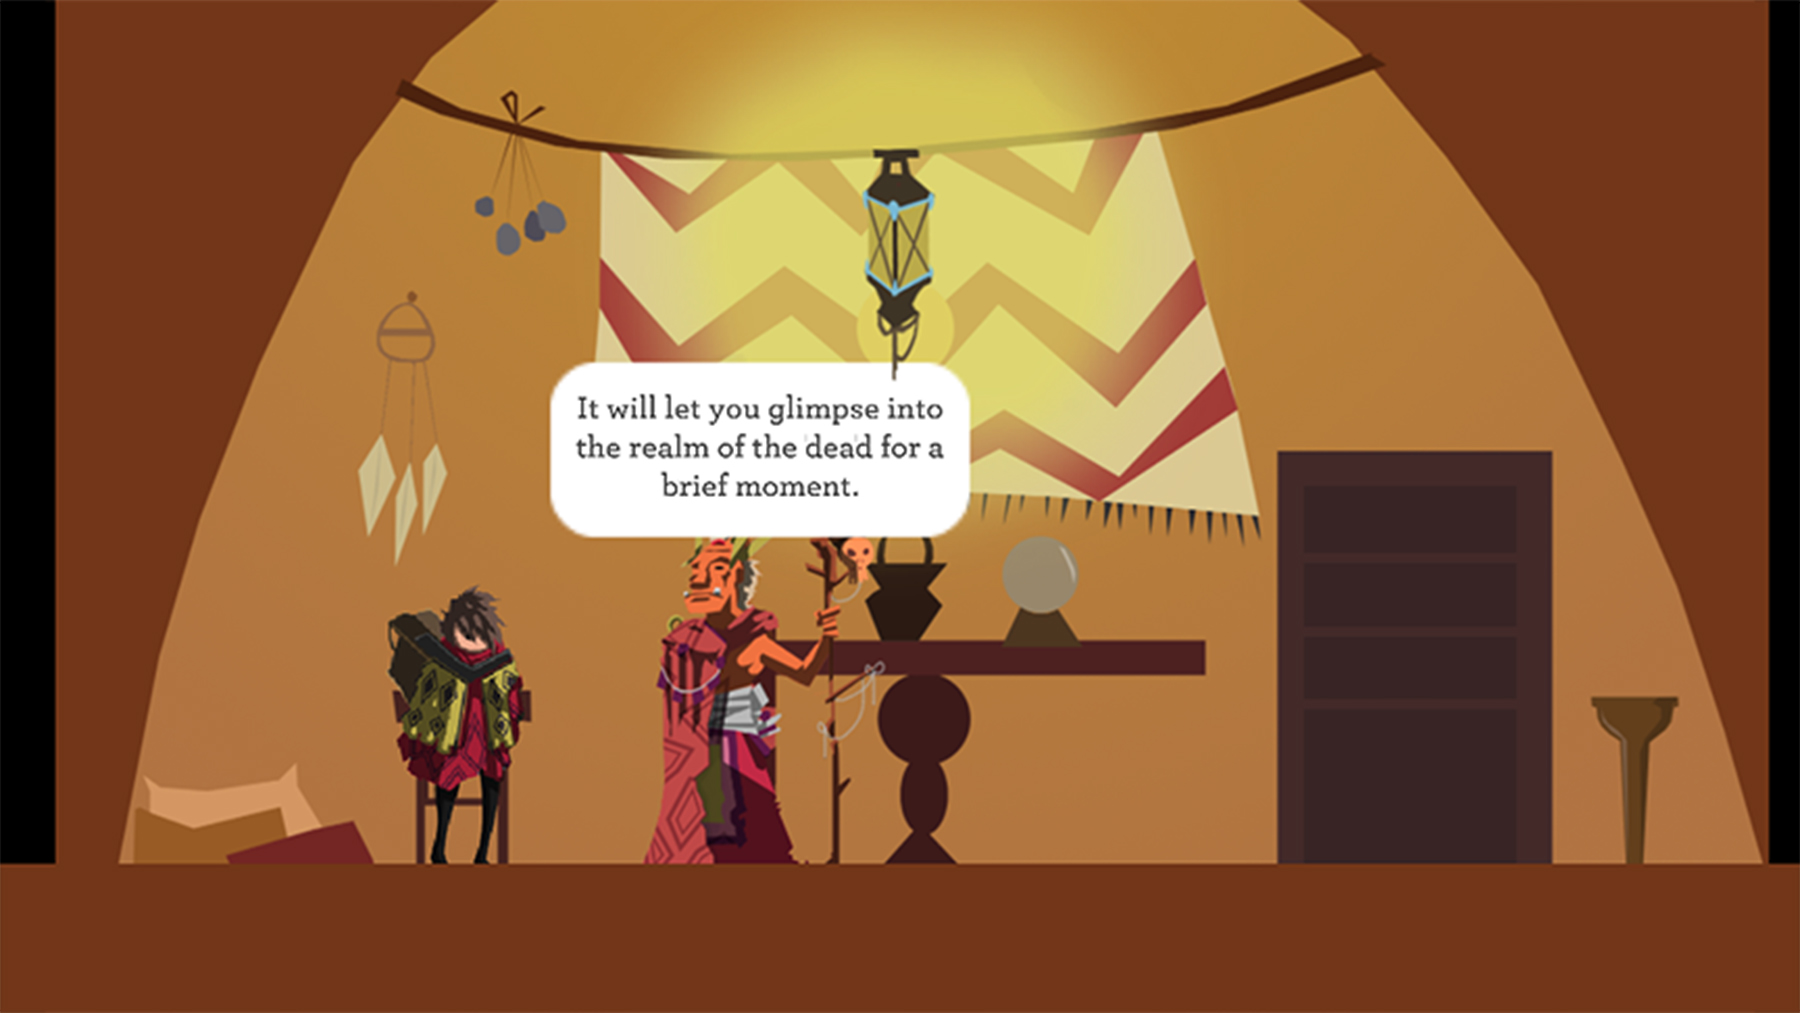 Screenshot of a character talking to a shaman inside a hut. Both are standing below a hanging lantern. The shaman has a speech bubble of text above him, reading, 'It will let you glimpse into the realm of the dead for a brief moment'